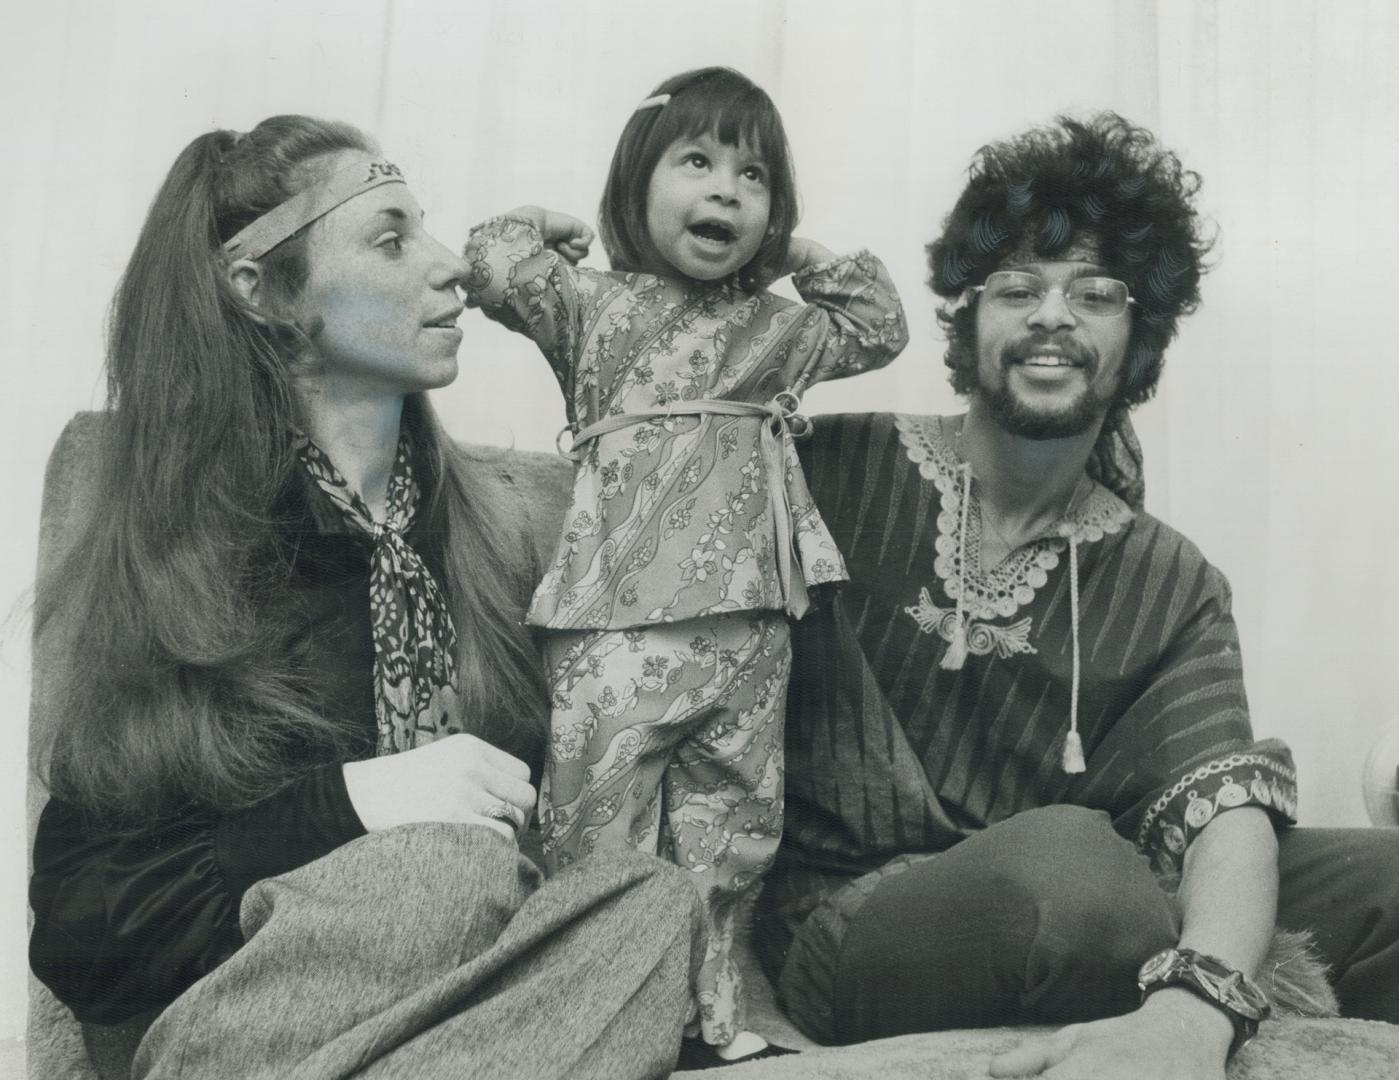 Wayne St. John, also in Hair, is shown with his wife Rochelle and his daughter Michelle, 2 1/2